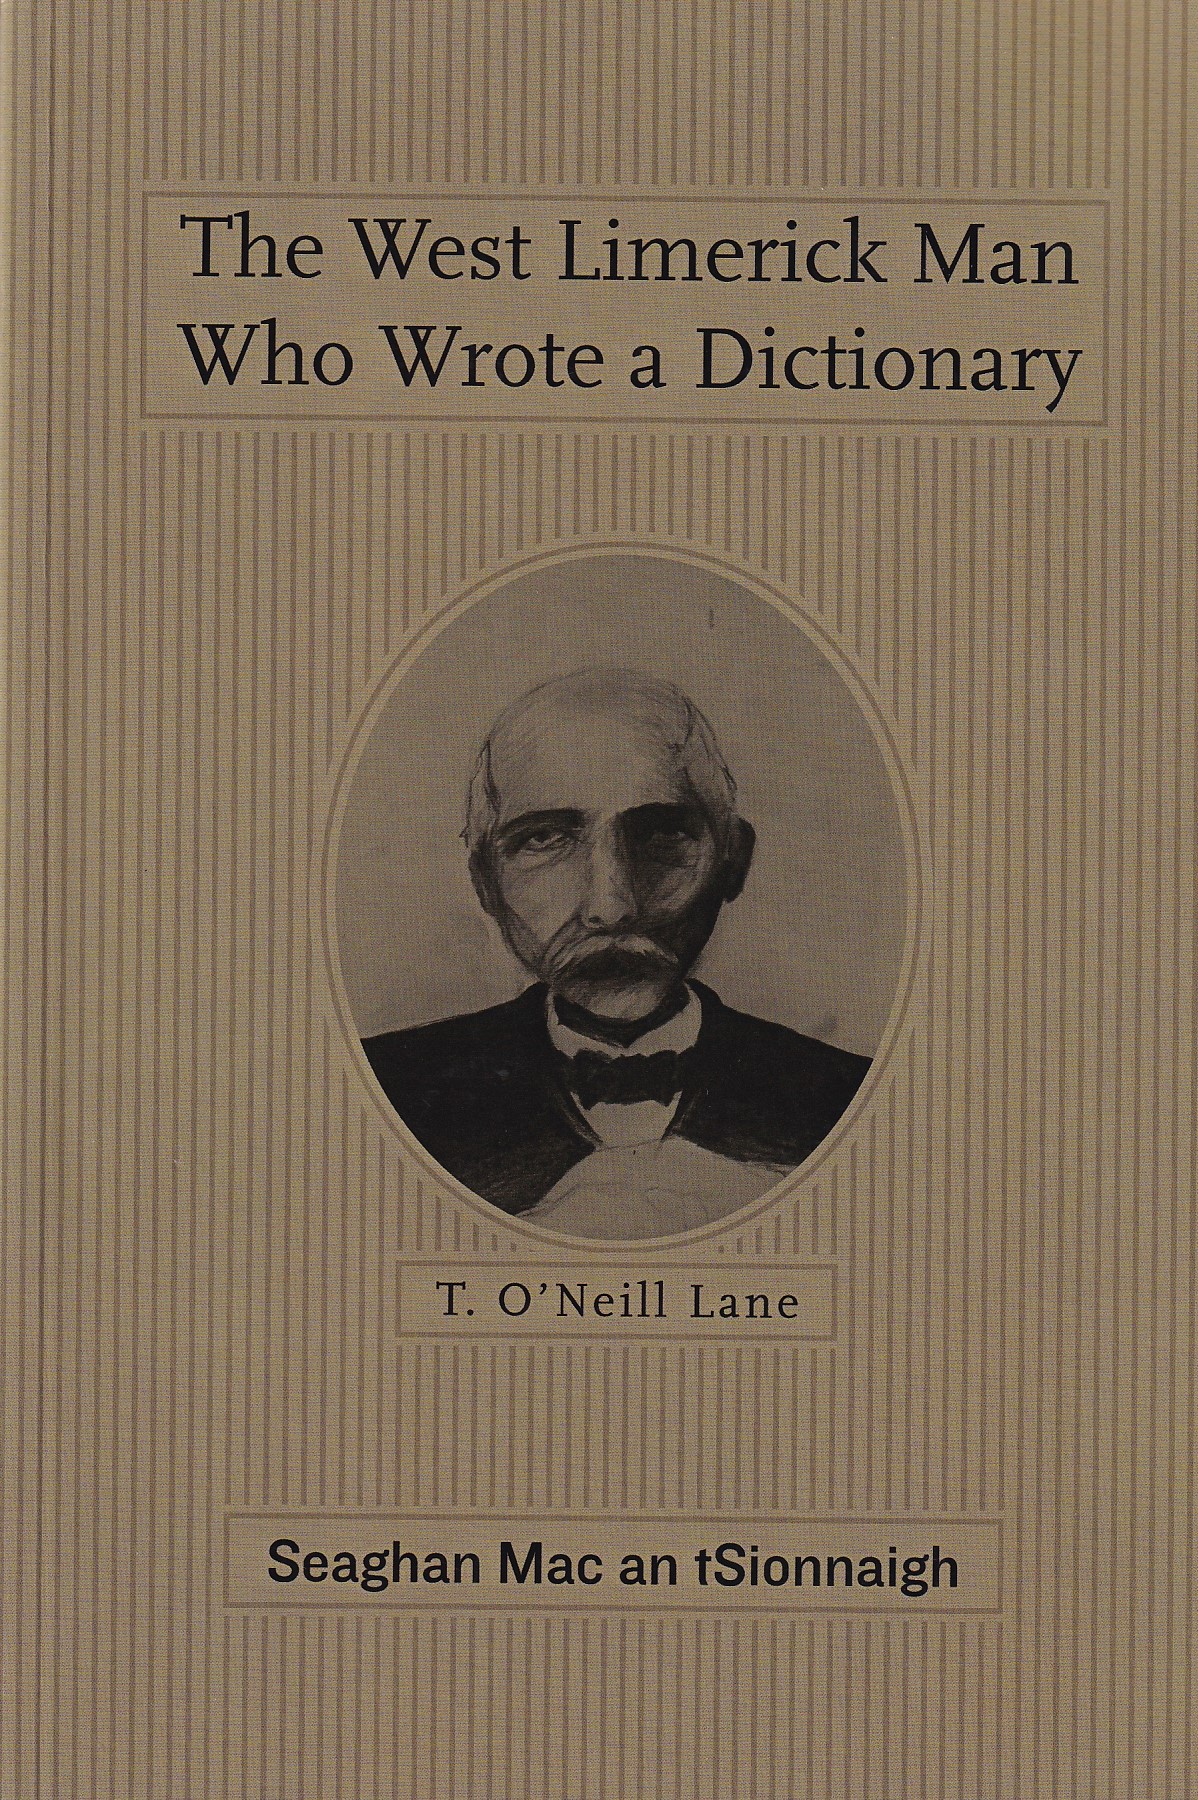 The West Limerick Man Who Wrote a Dictionary: T. O’Neill Lane | Mac An TSionnaigh, Seaghan | Charlie Byrne's